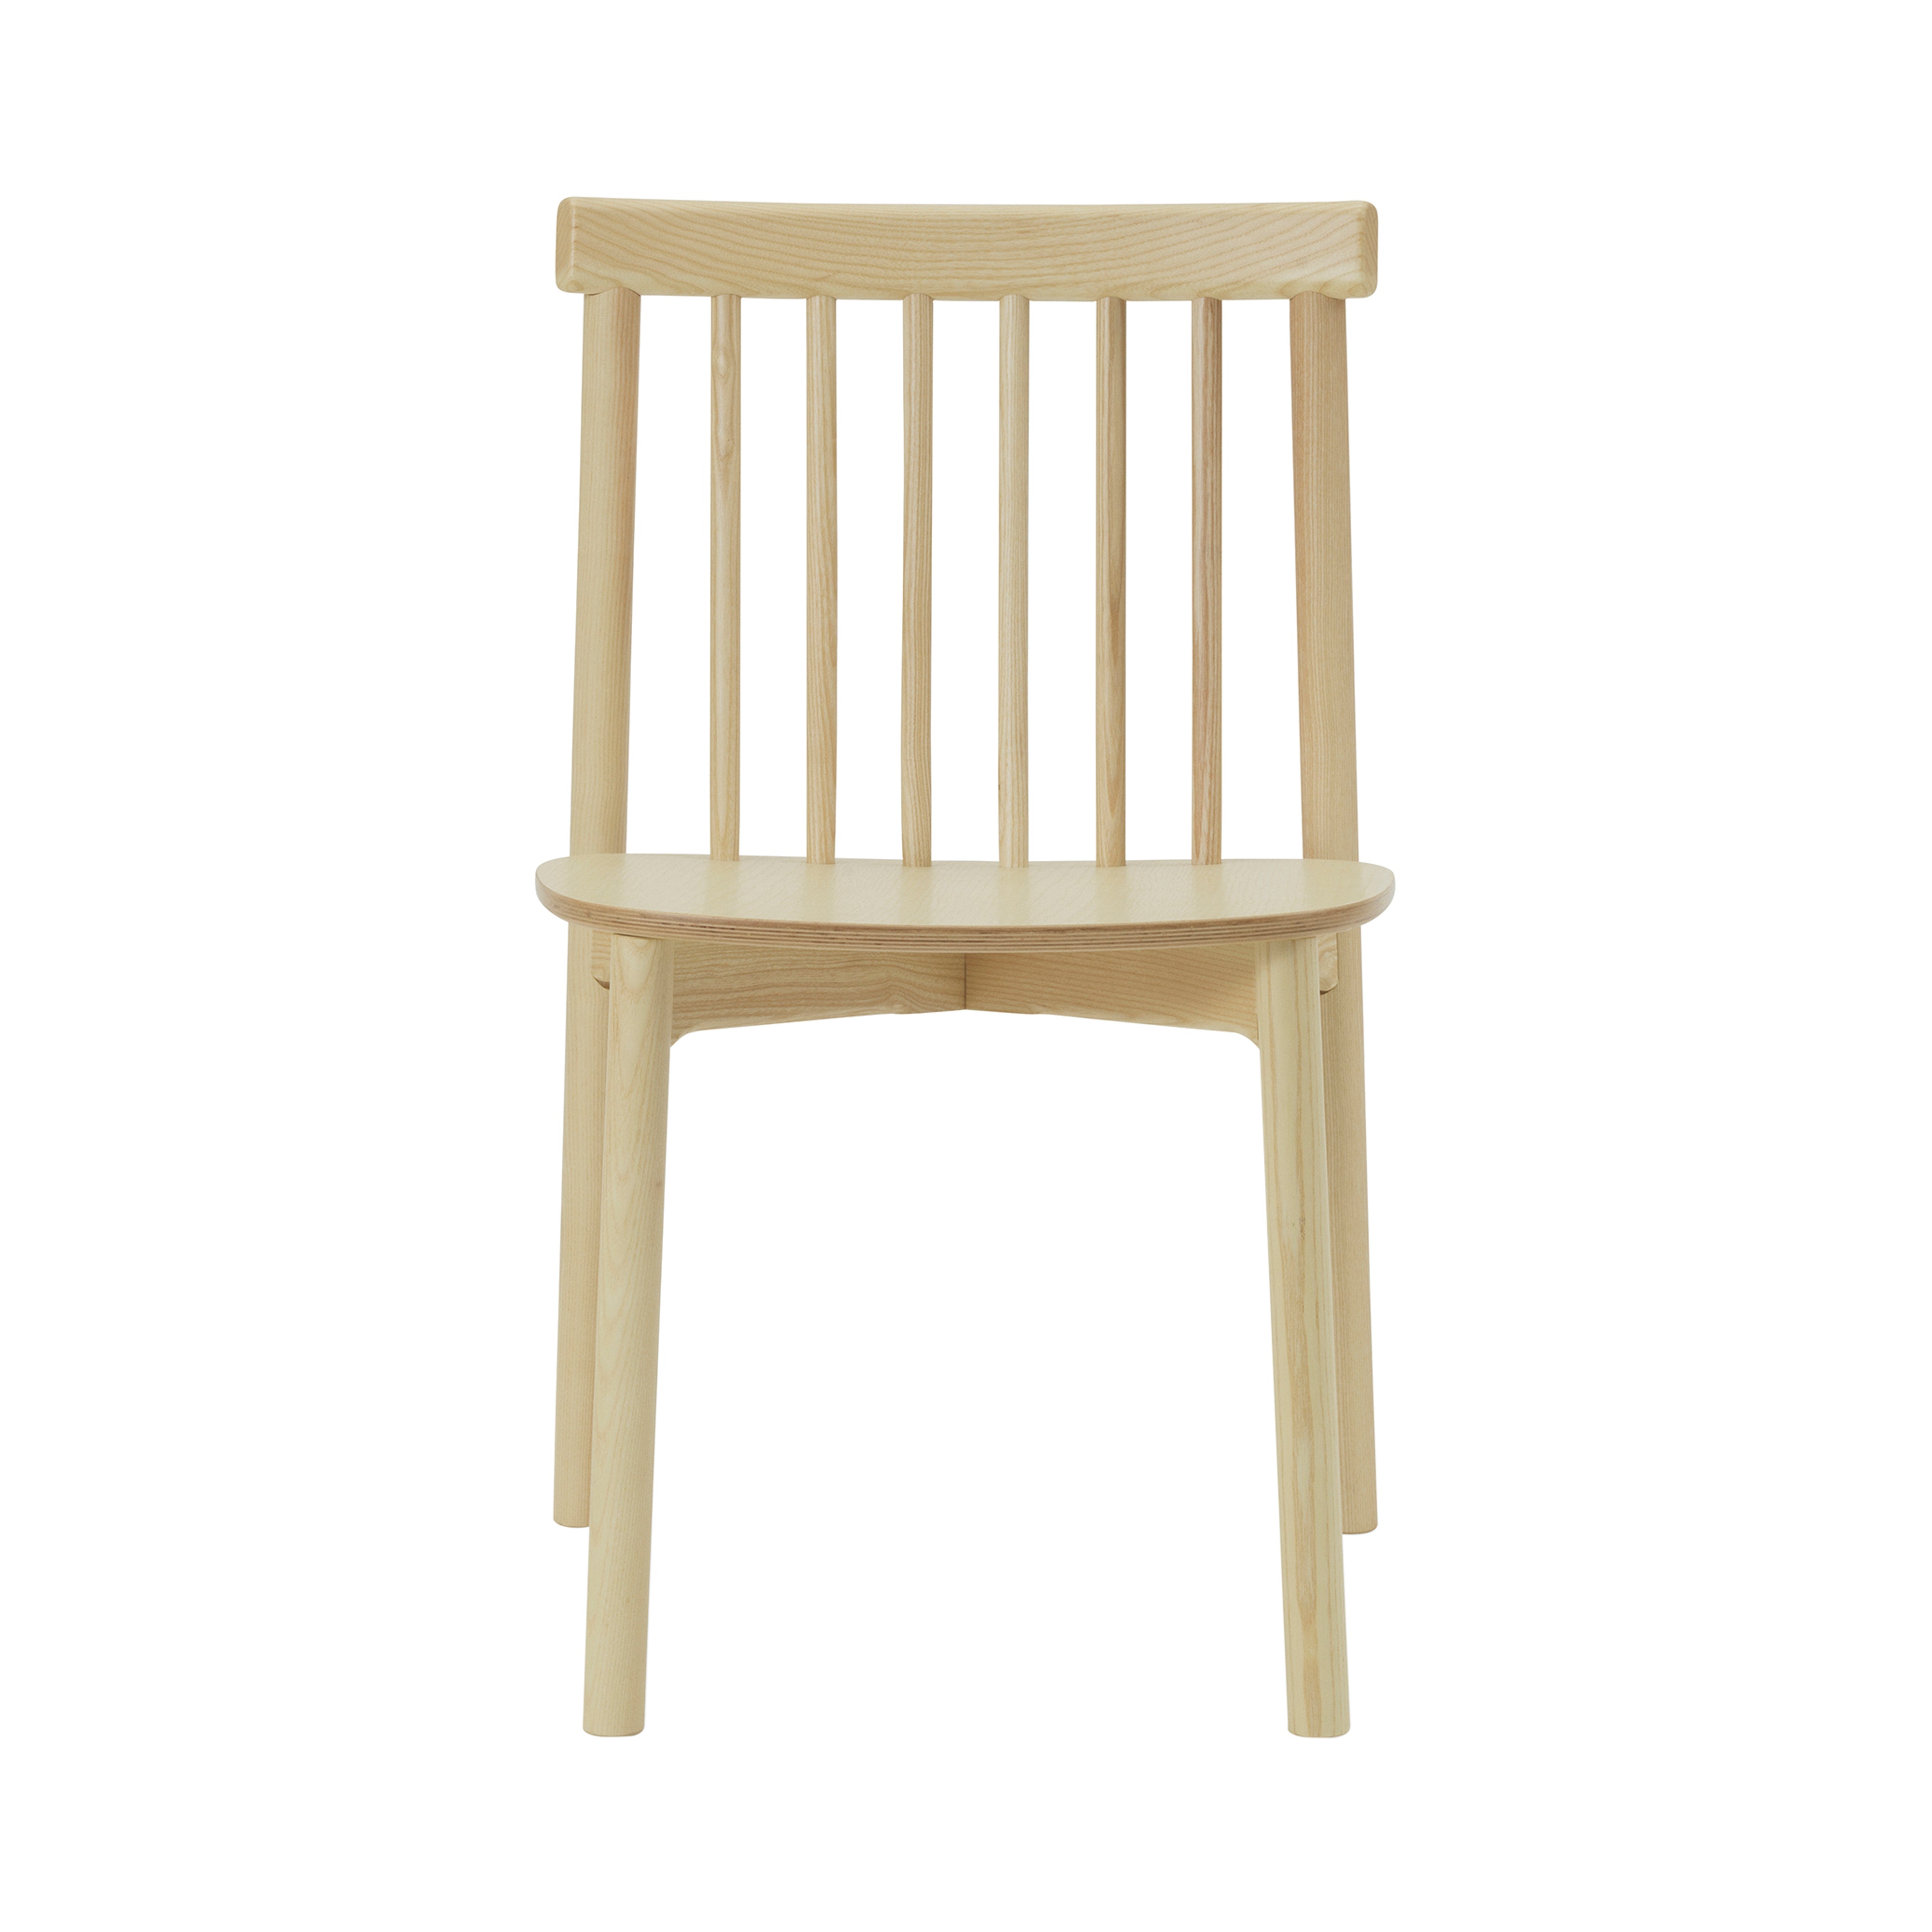 Pind Chair: Without Arm + Ash